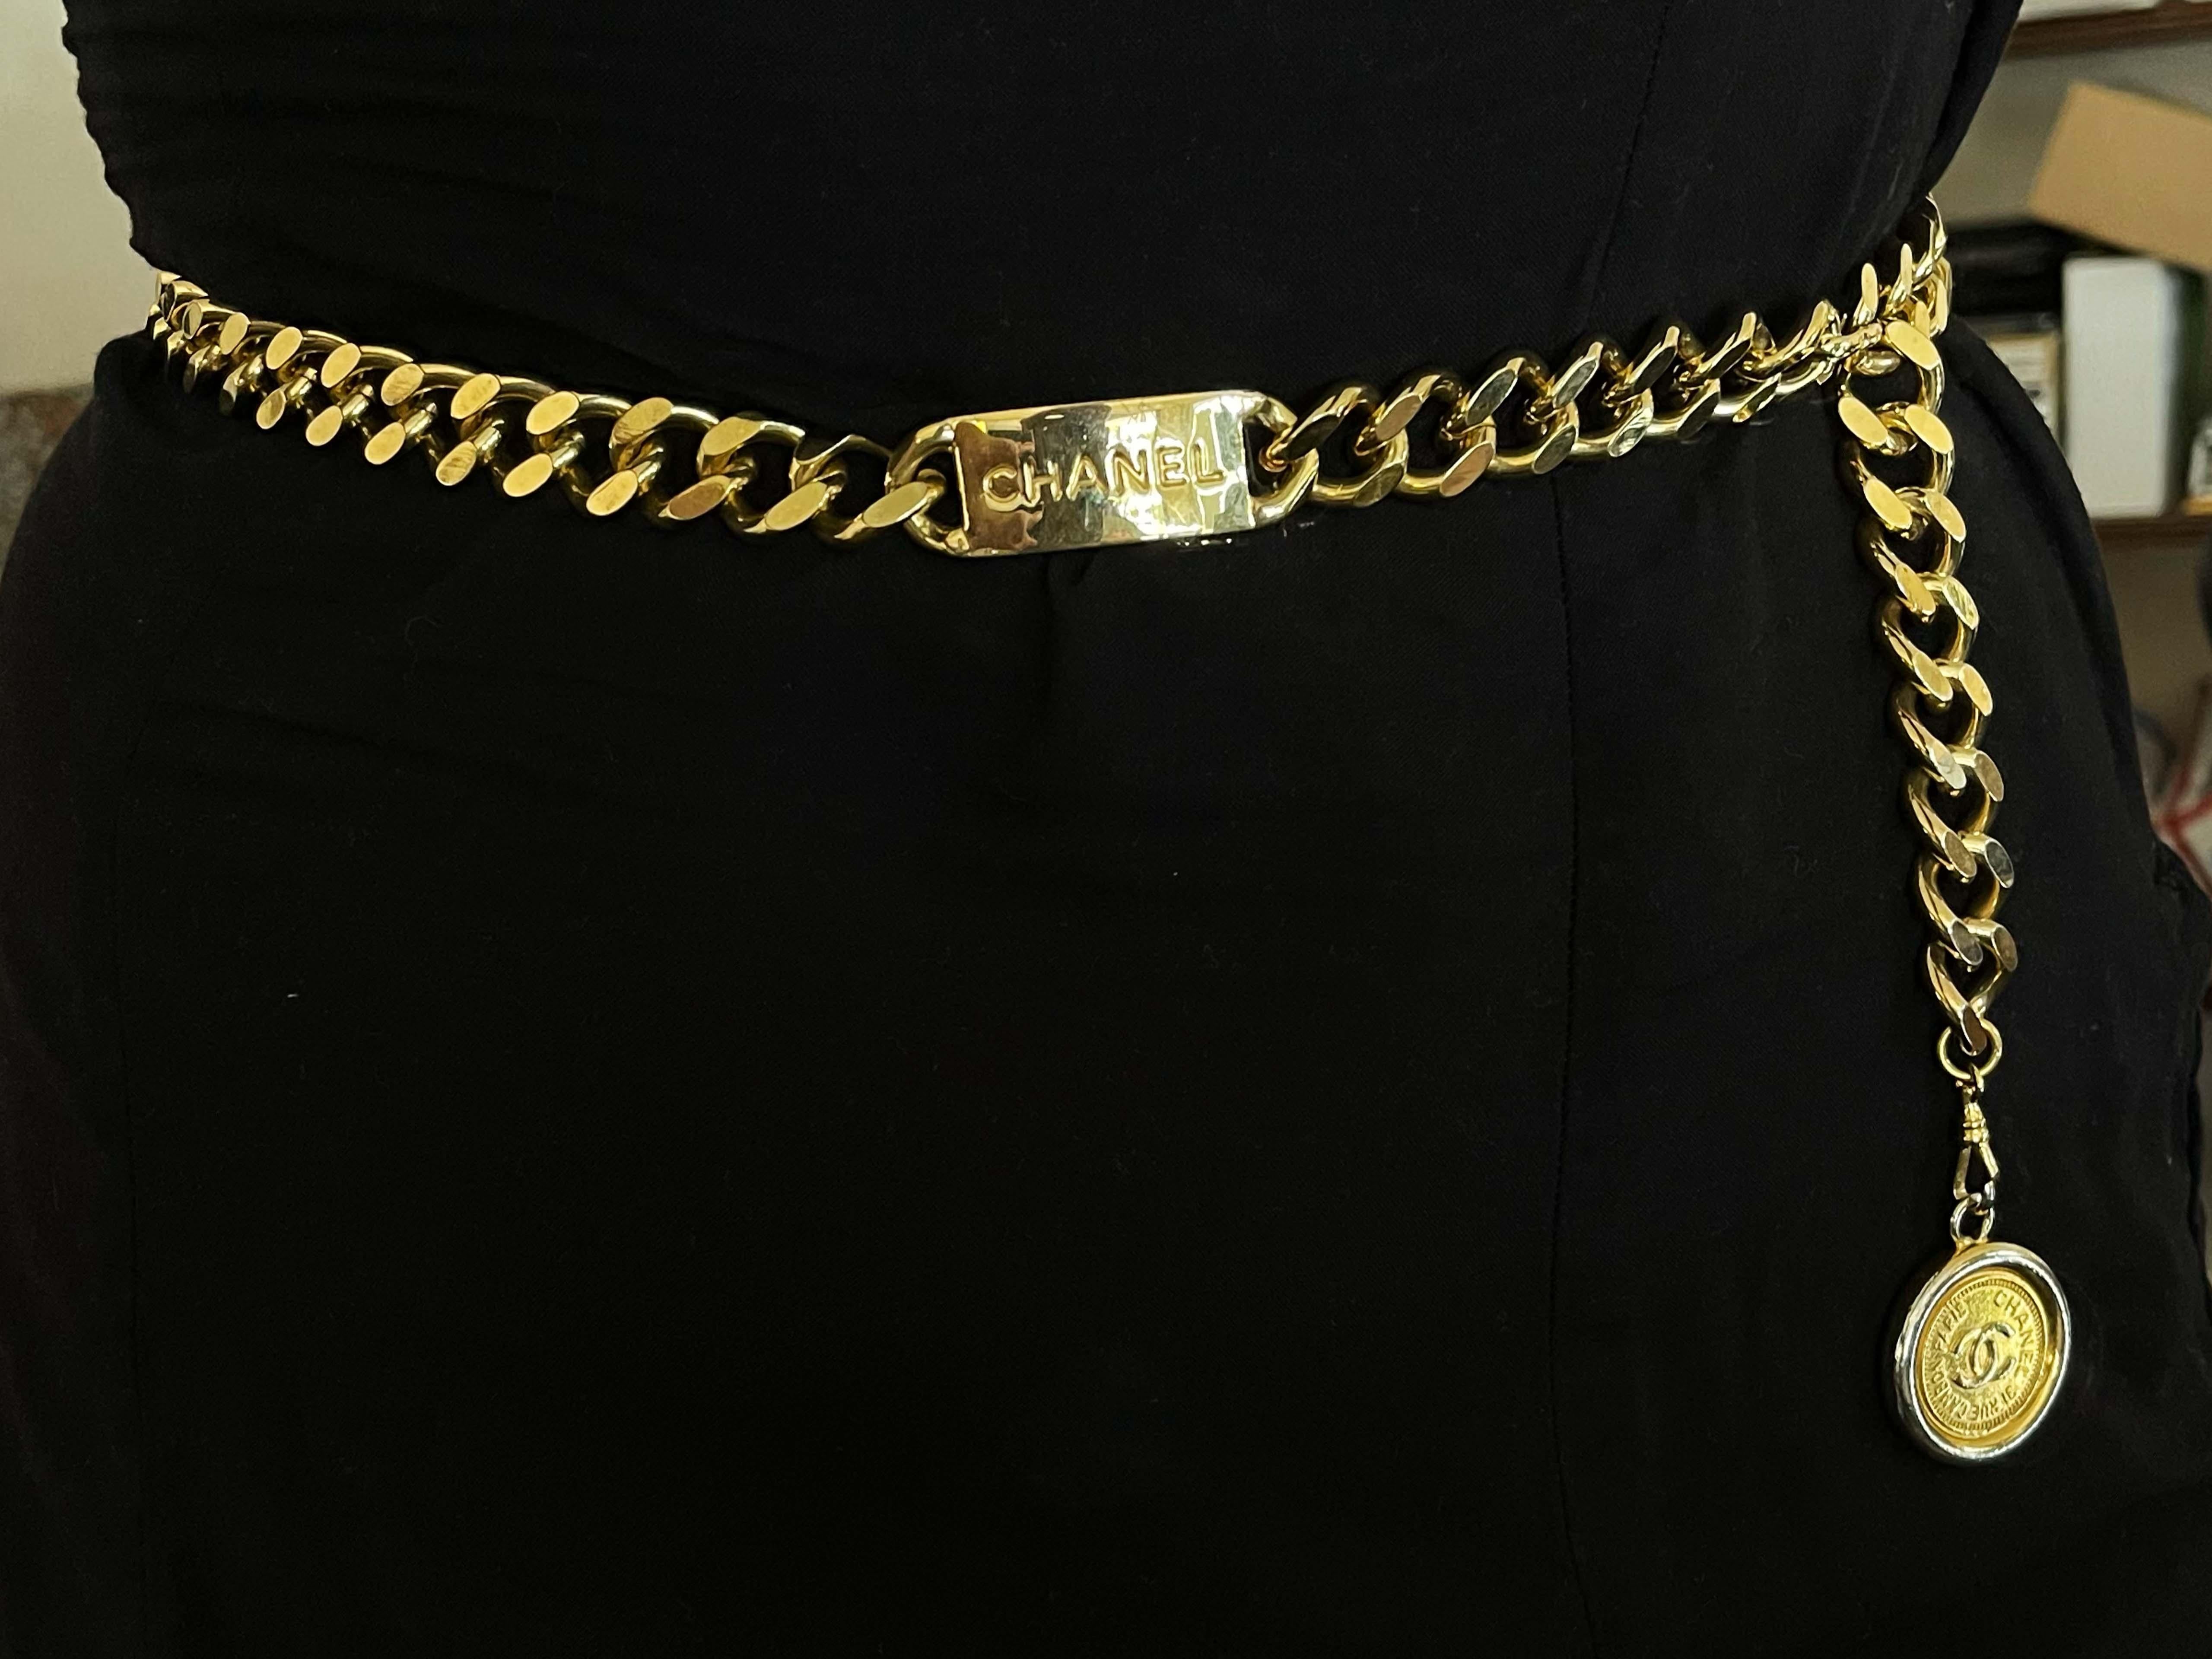 Classic and chic, this vintage Chanel chain belt is crafted in gold-plated metal, accented with a 'CC' logo-engraved medallion pendant. Closure can be hooked on multiple links for a variety of fits.
​
​Brooch Specifications:

Designer: CHANEL

Fits